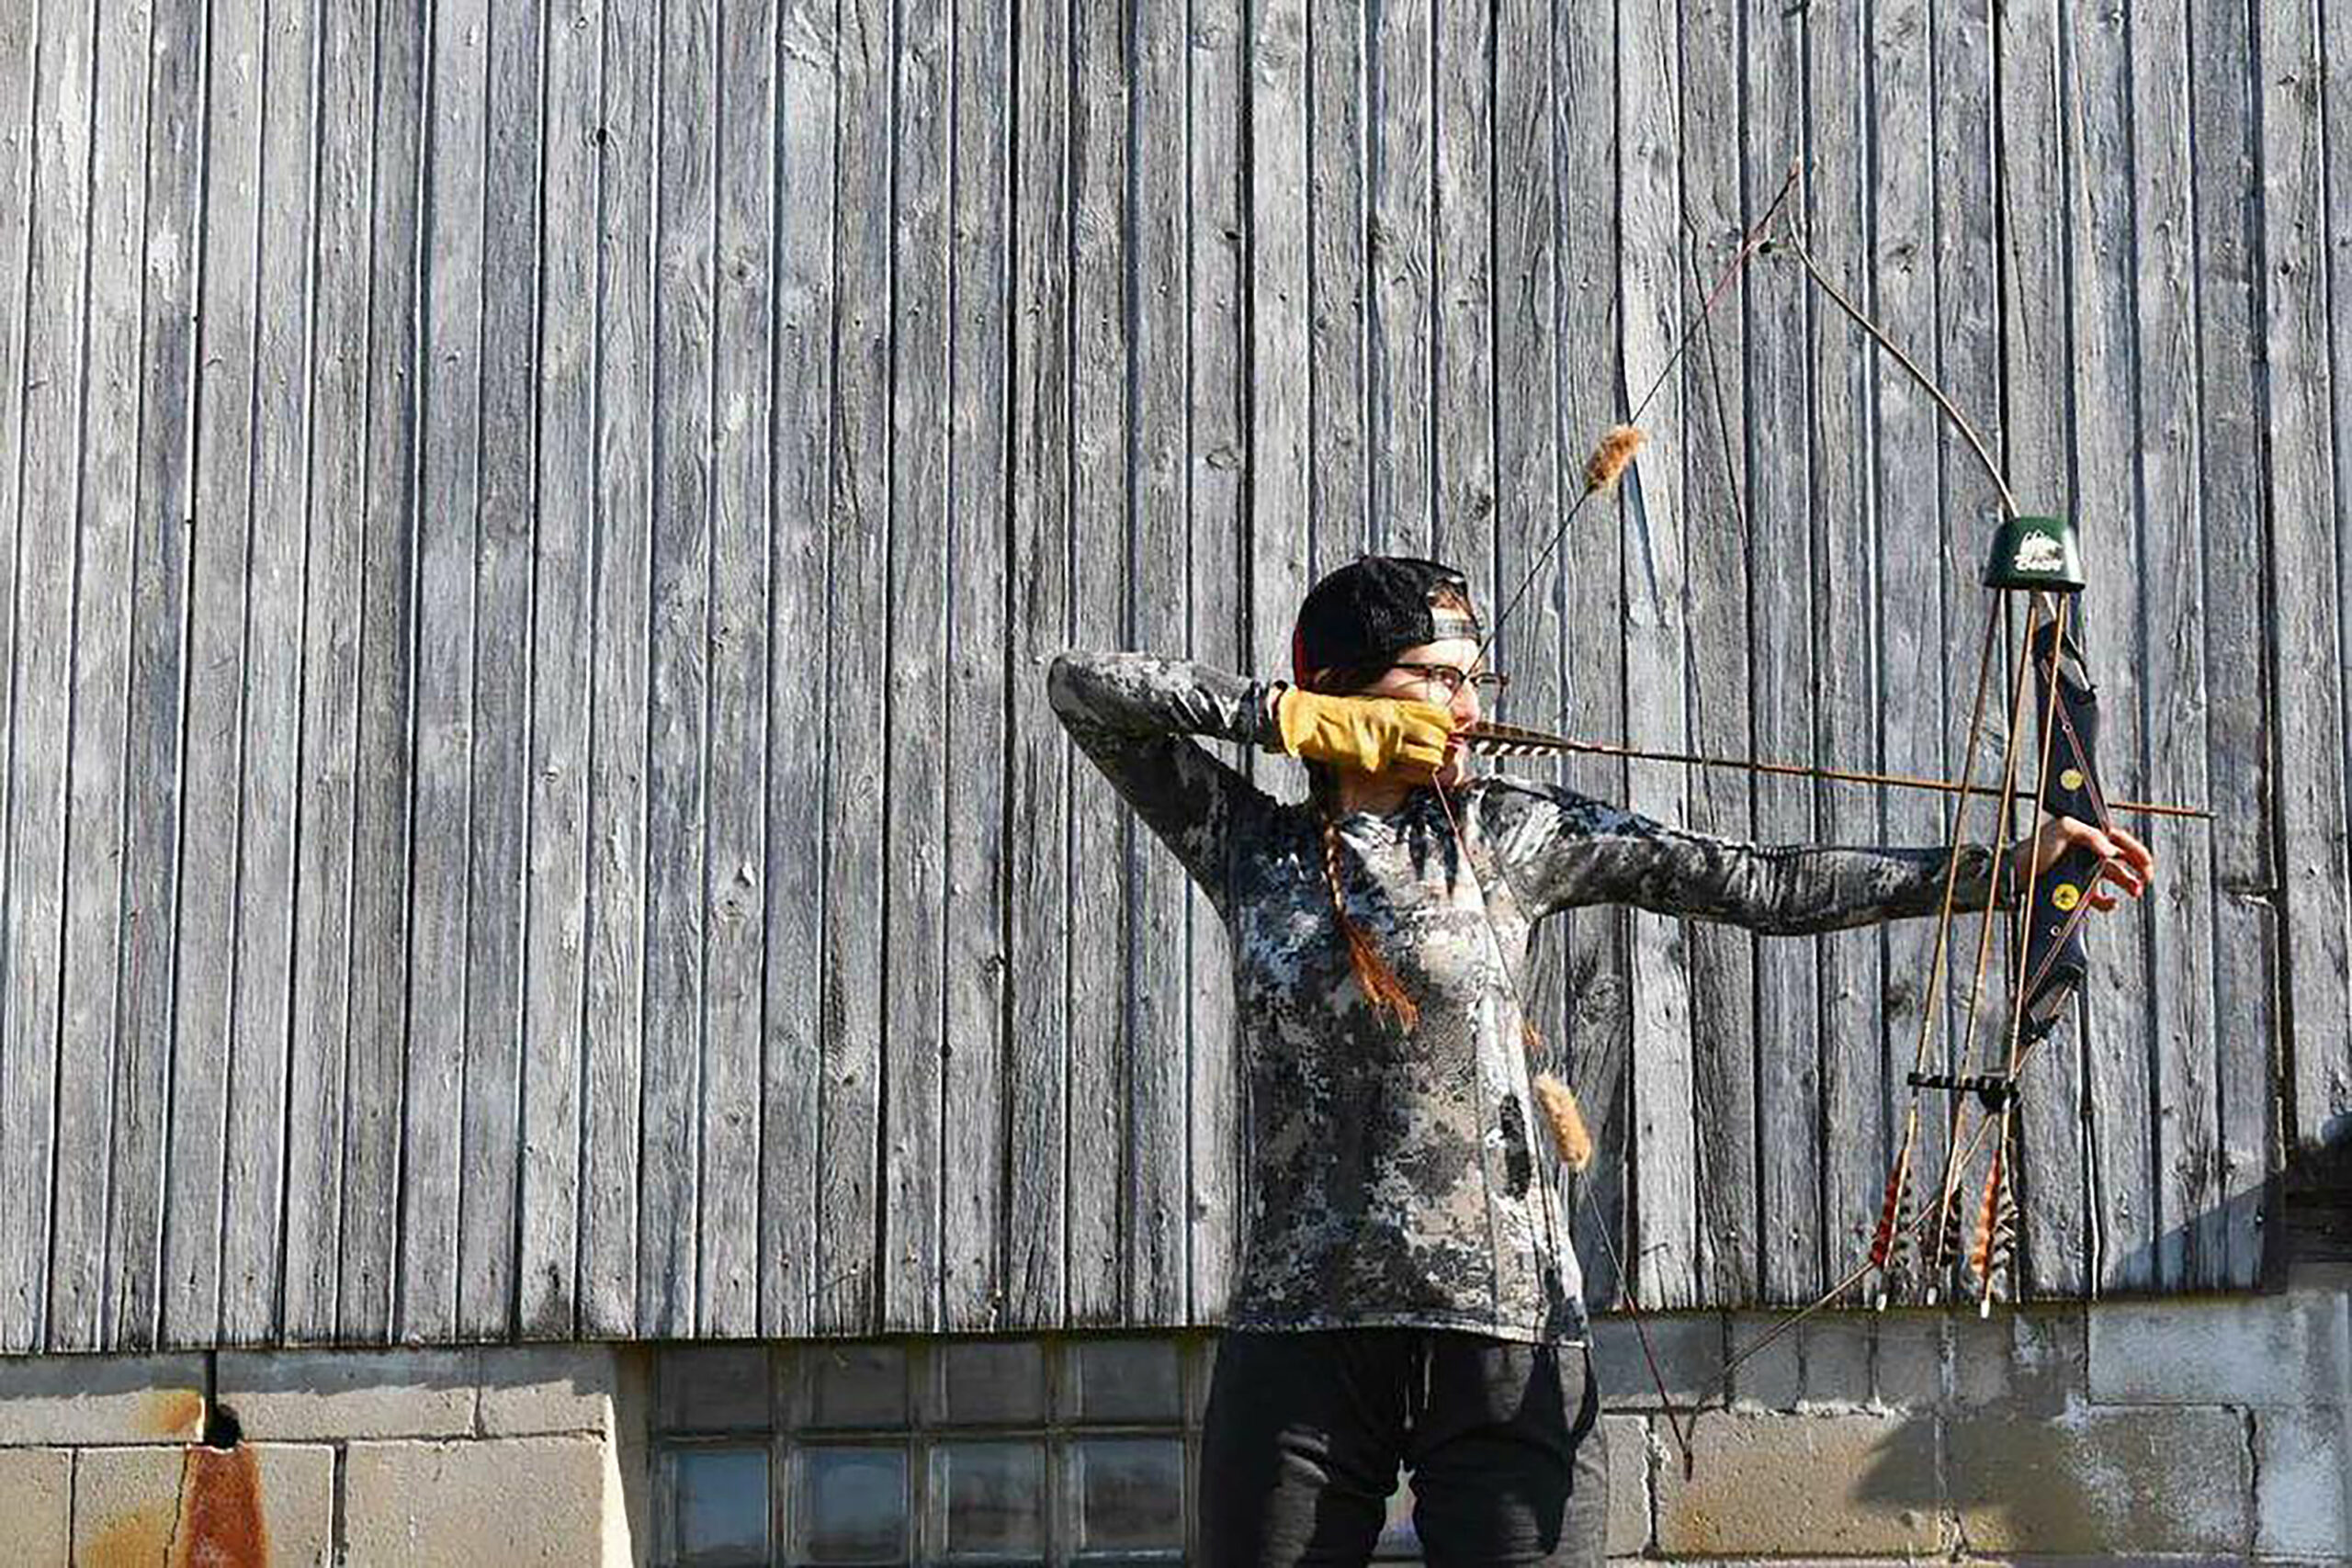 A female archer draws a traditional recurve bow in front of a wooden barn .